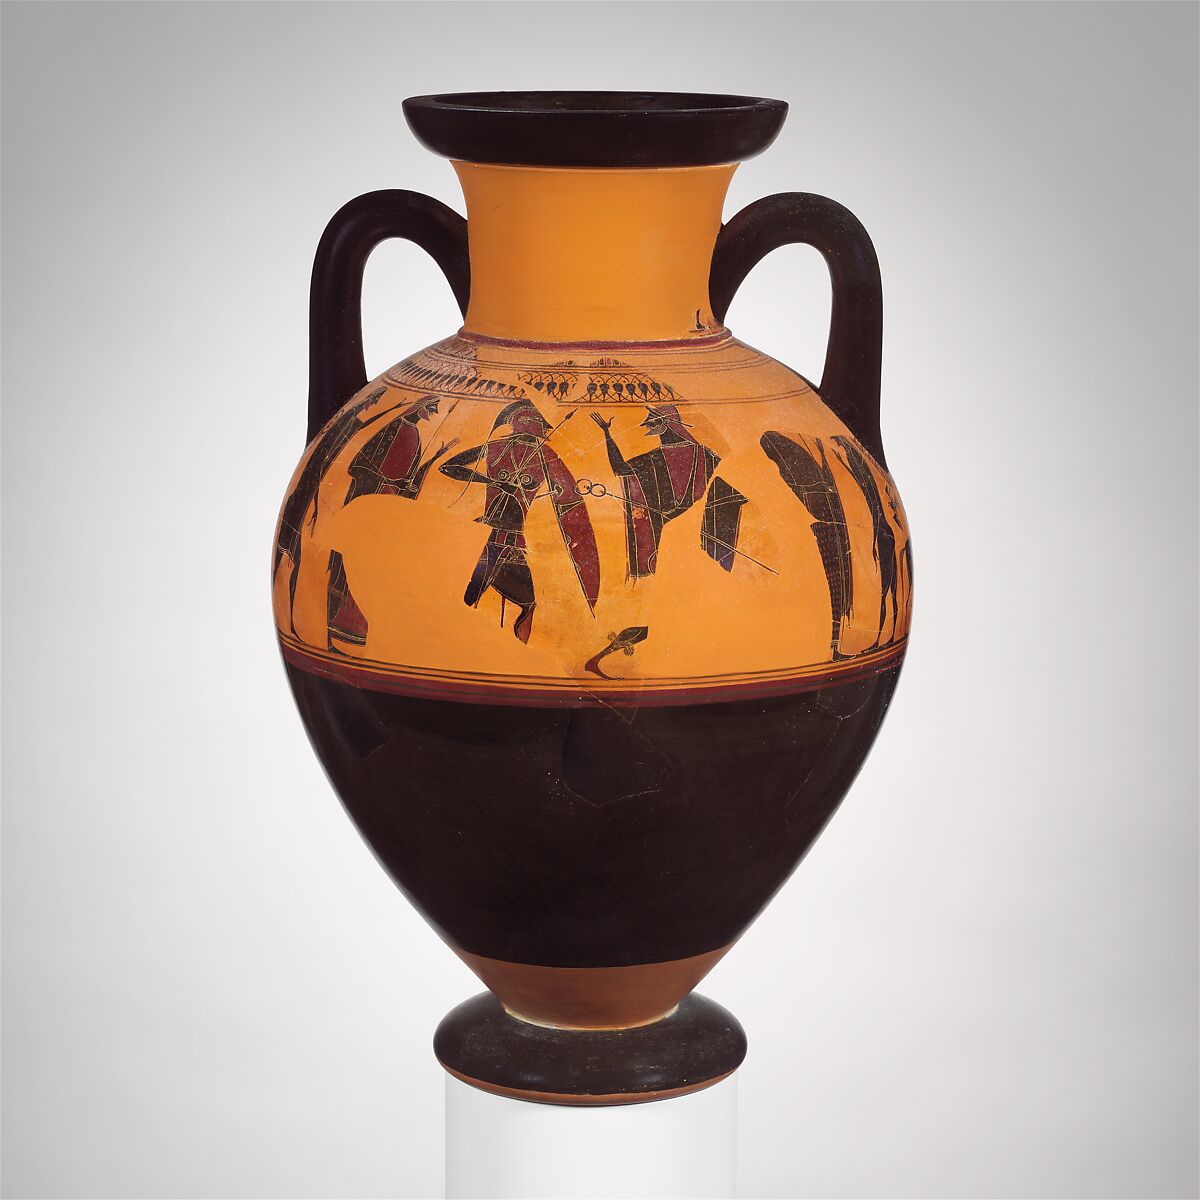 Attributed to the Affecter | Terracotta neck-amphora (jar) | Greek